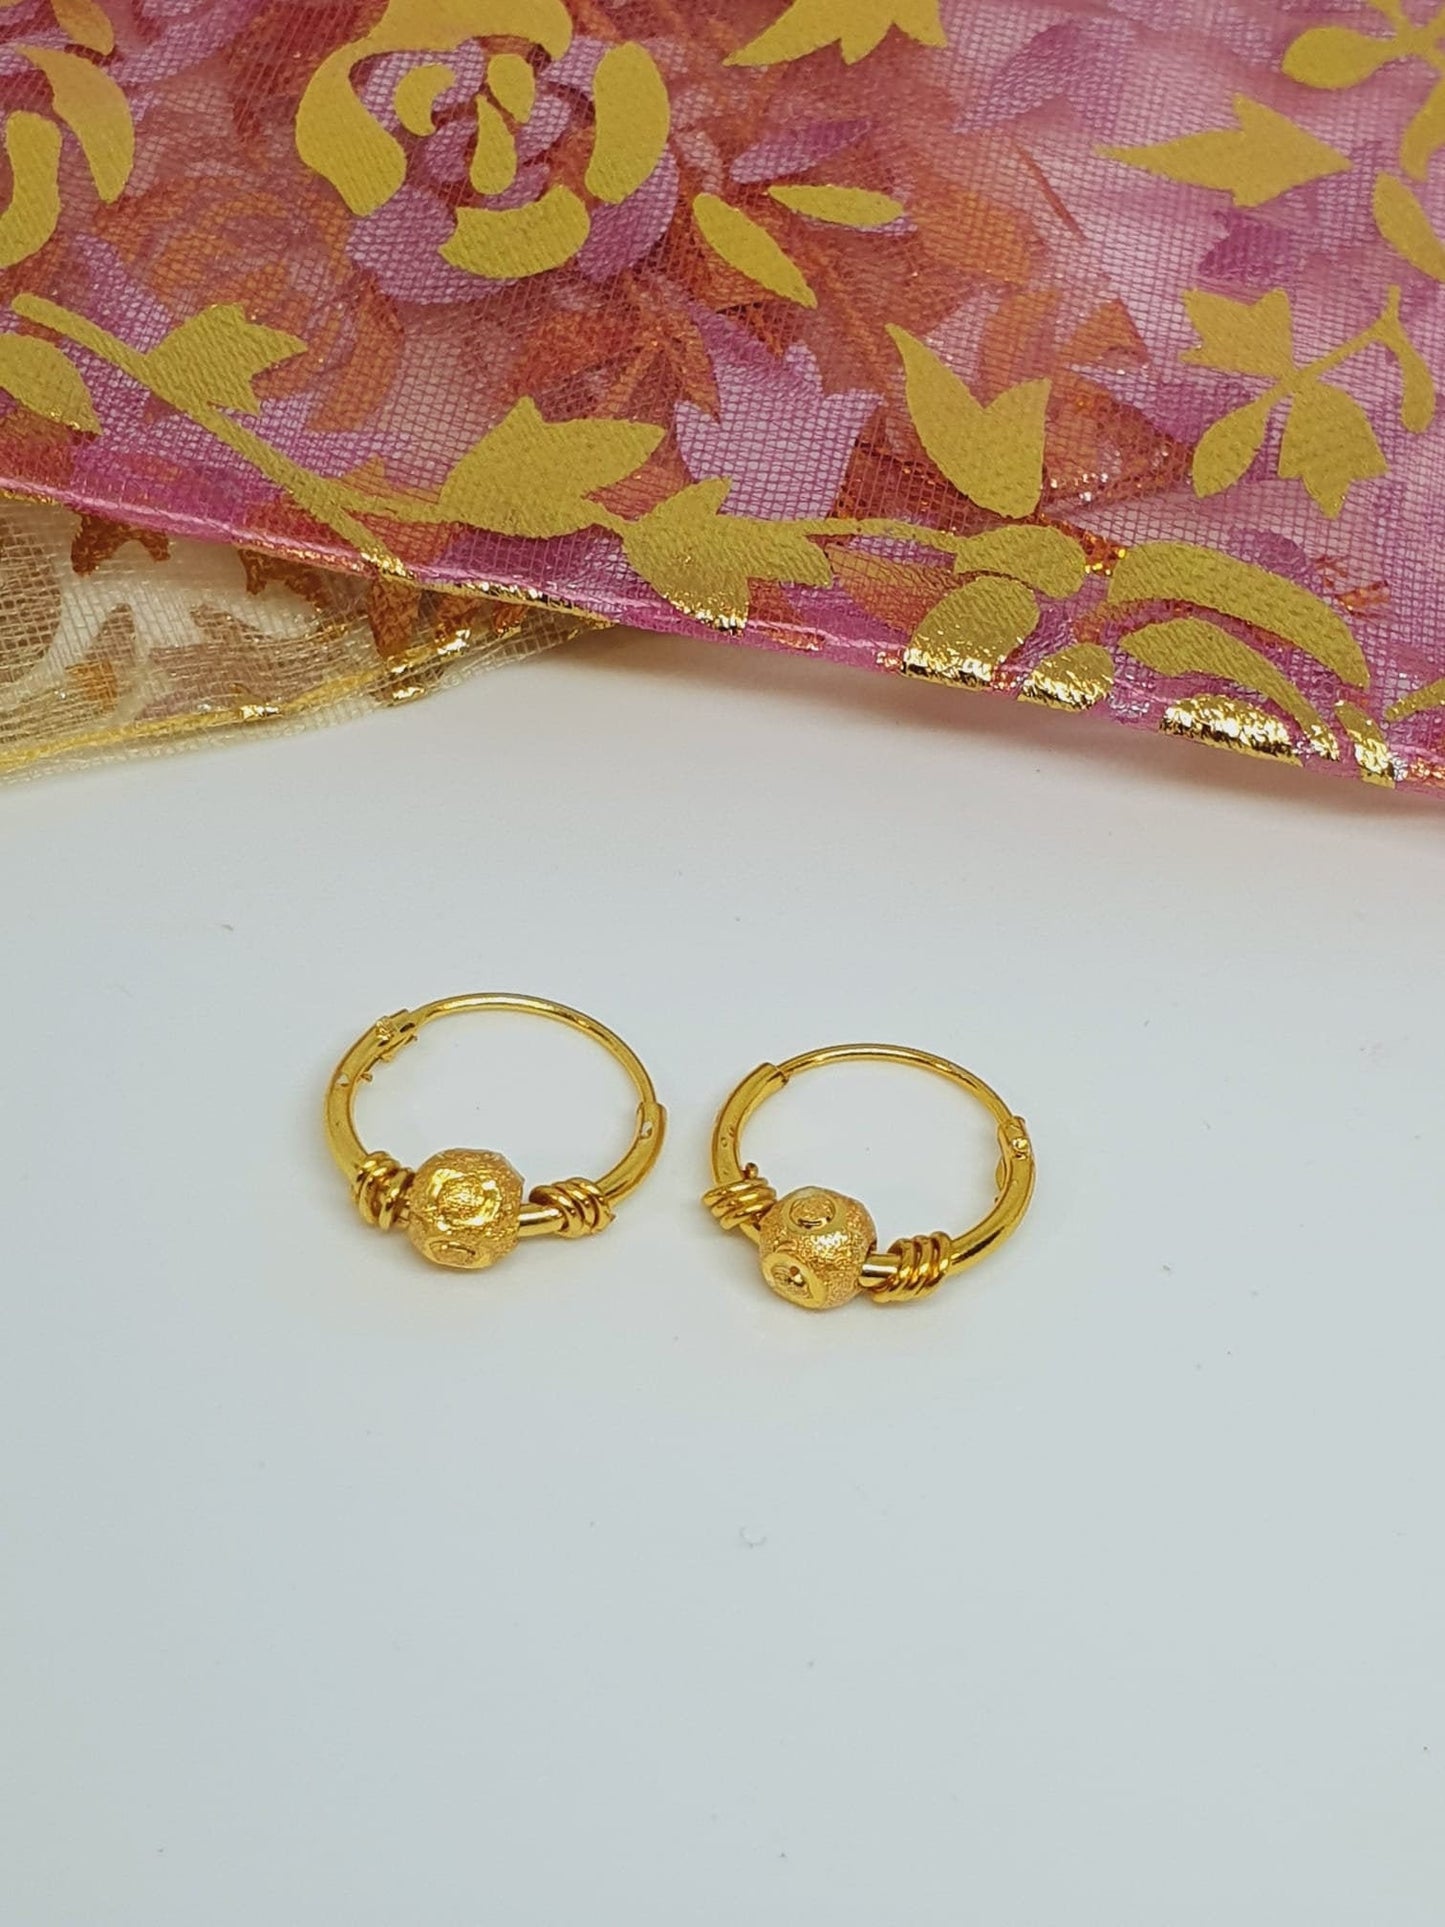 2 pieces Hoop Nose Ring Gold Bali Bollywood Wedding Indian Jewelry Women Pierced Nose